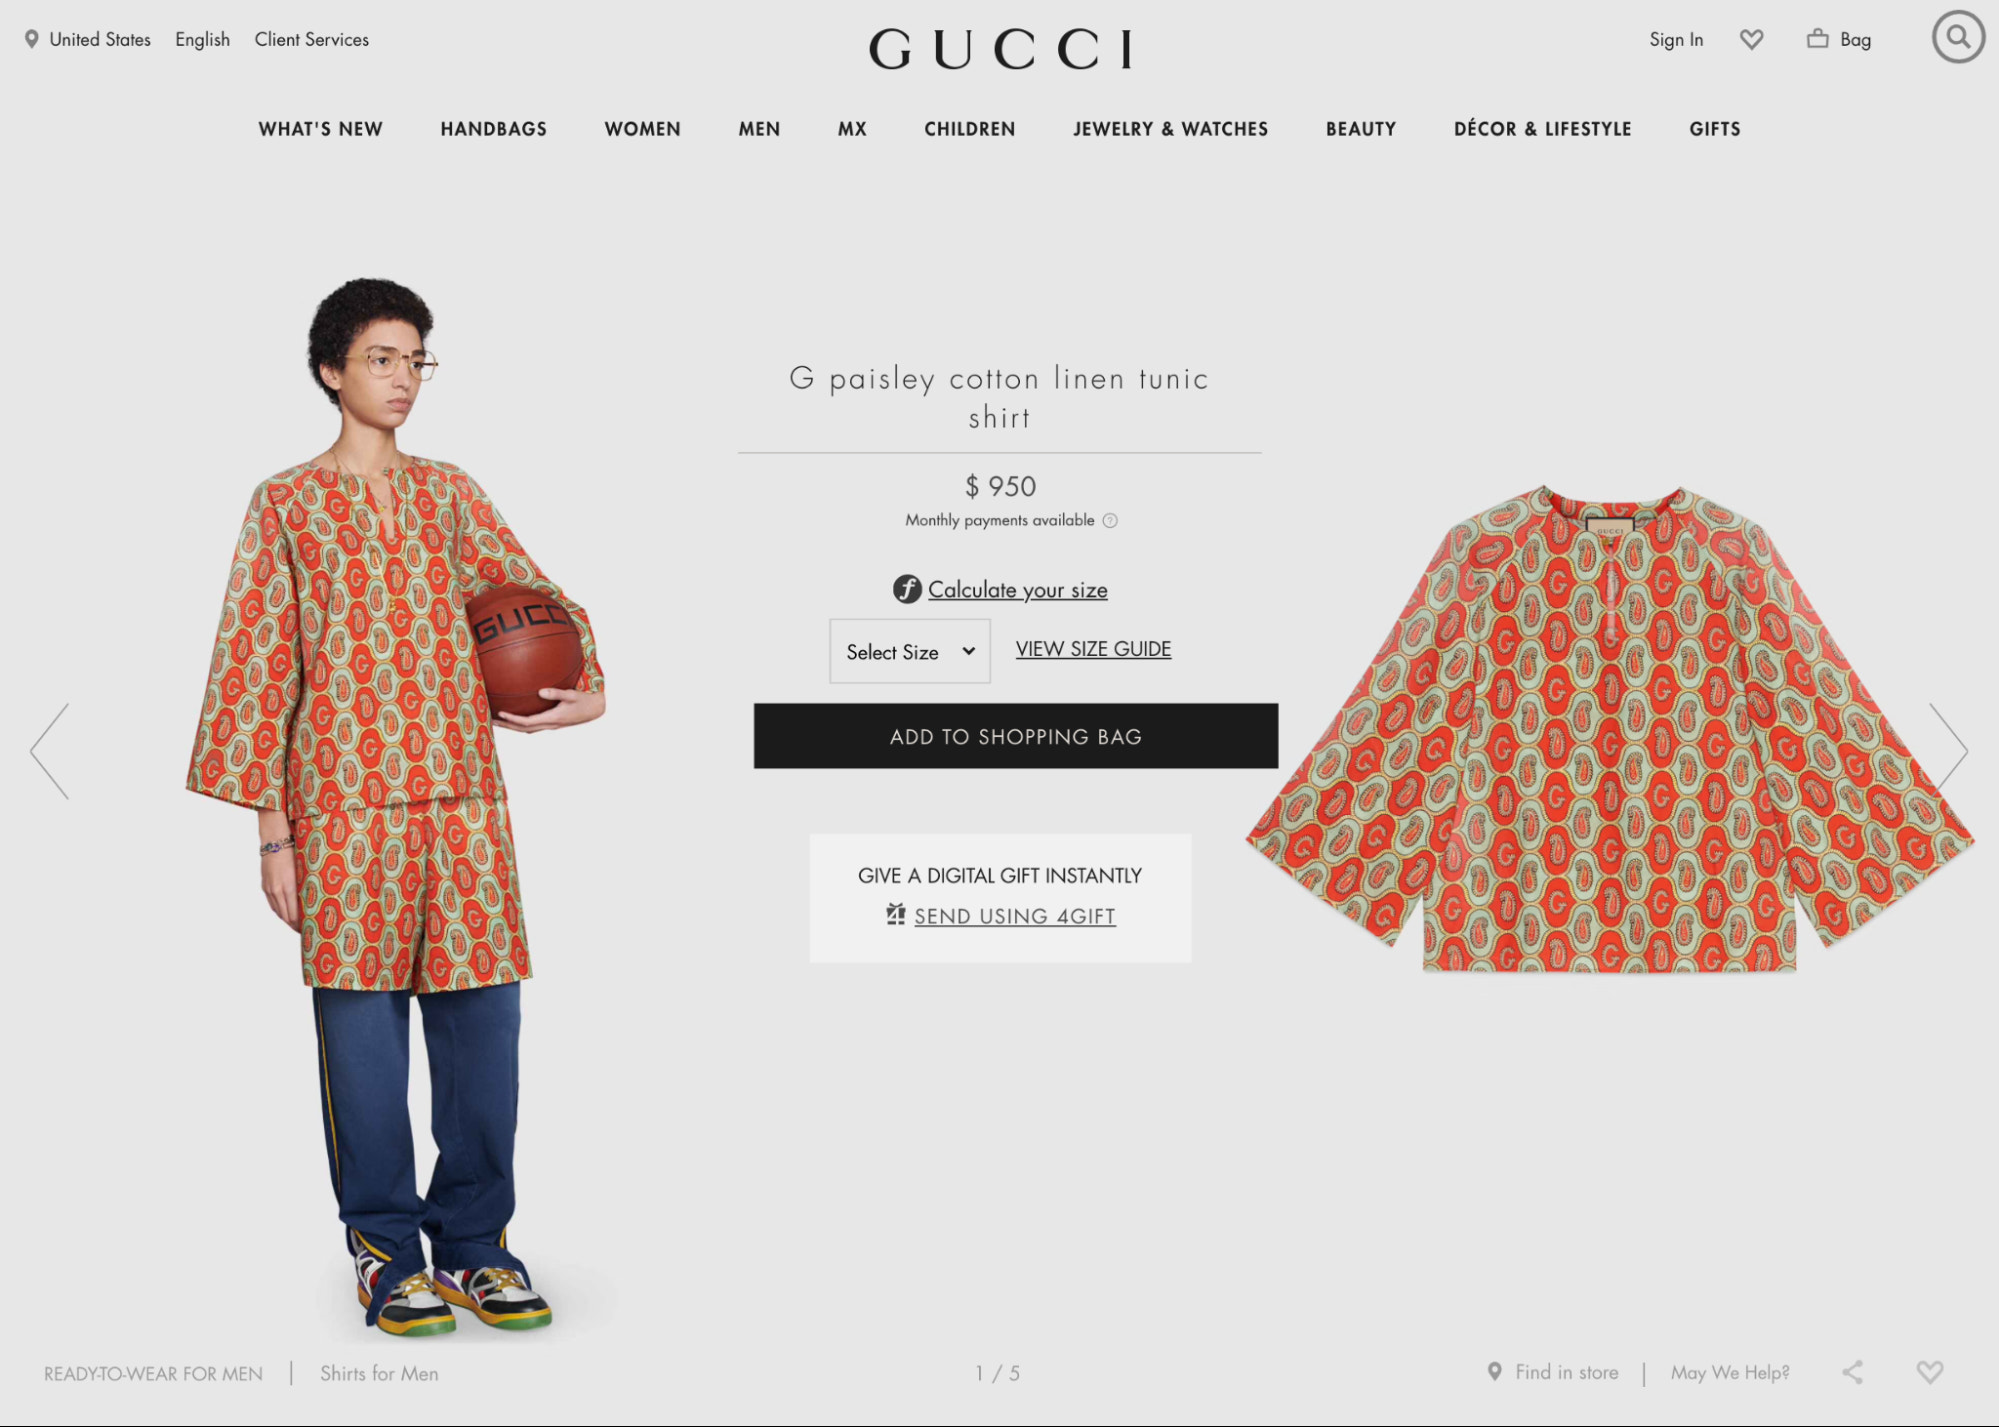 Found 23 results for gucci shoes, Buy, Sell, Find or Rent Anything Easily  in Malaysia